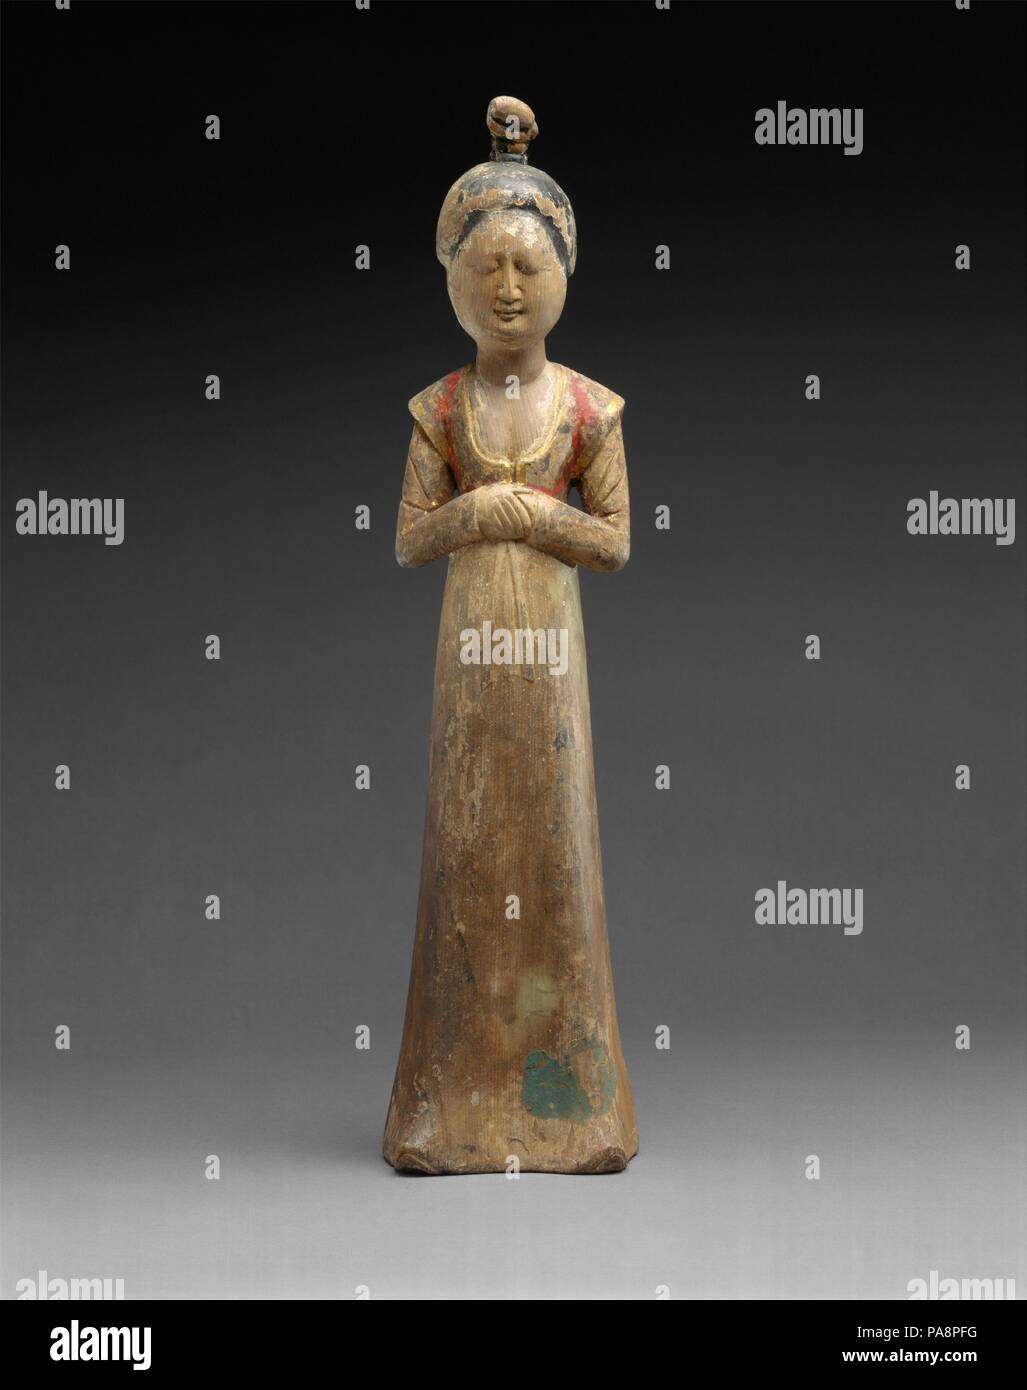 Standing Female Attendant. Culture: China. Dimensions: H. 21 in. (53.3 cm). Date: late 7th century-early 8th century.  This rare surviving example of a tomb figurine carved from wood must have come from the dry regions of the Silk Road, but displays the fashionable high-waisted dress and short jacket of the Tang court style. Museum: Metropolitan Museum of Art, New York, USA. Stock Photo